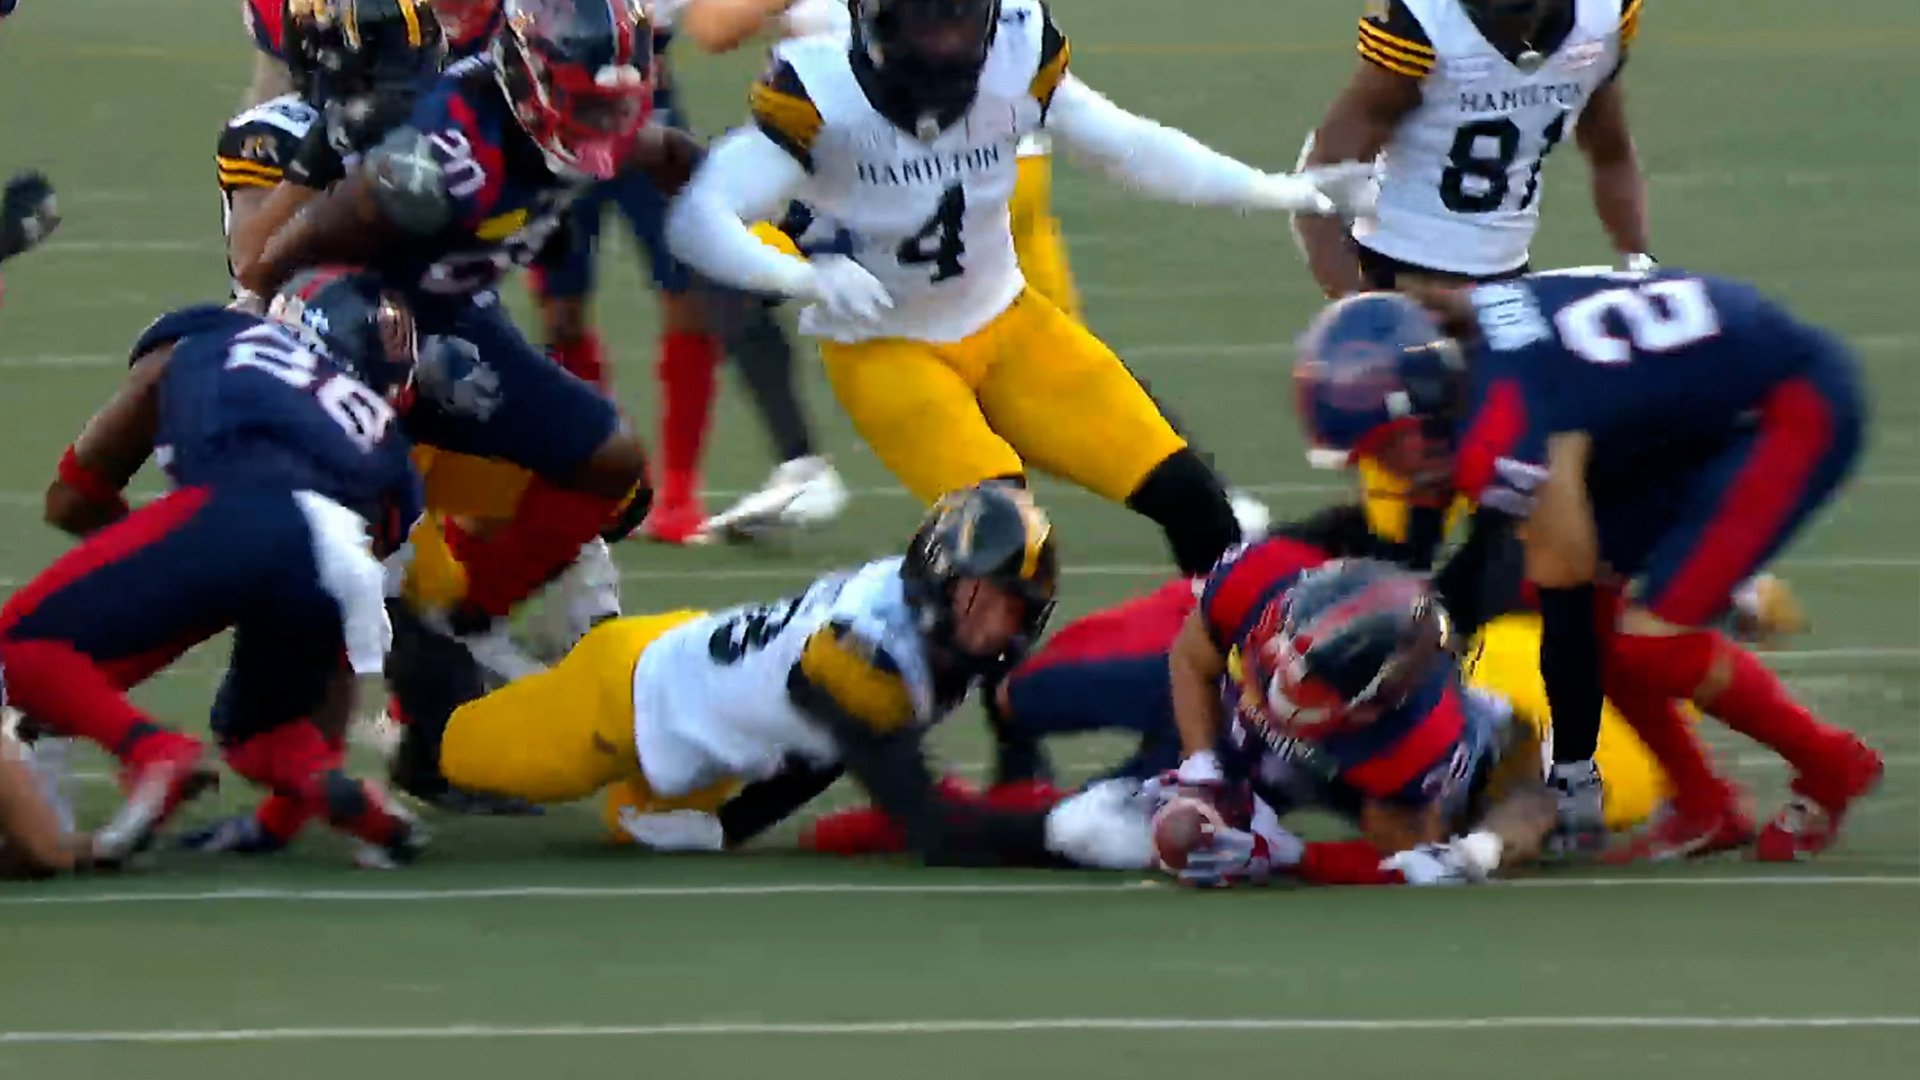 Tiger-Cats beat Alouettes 23-12 in snowy CFL East semifinal